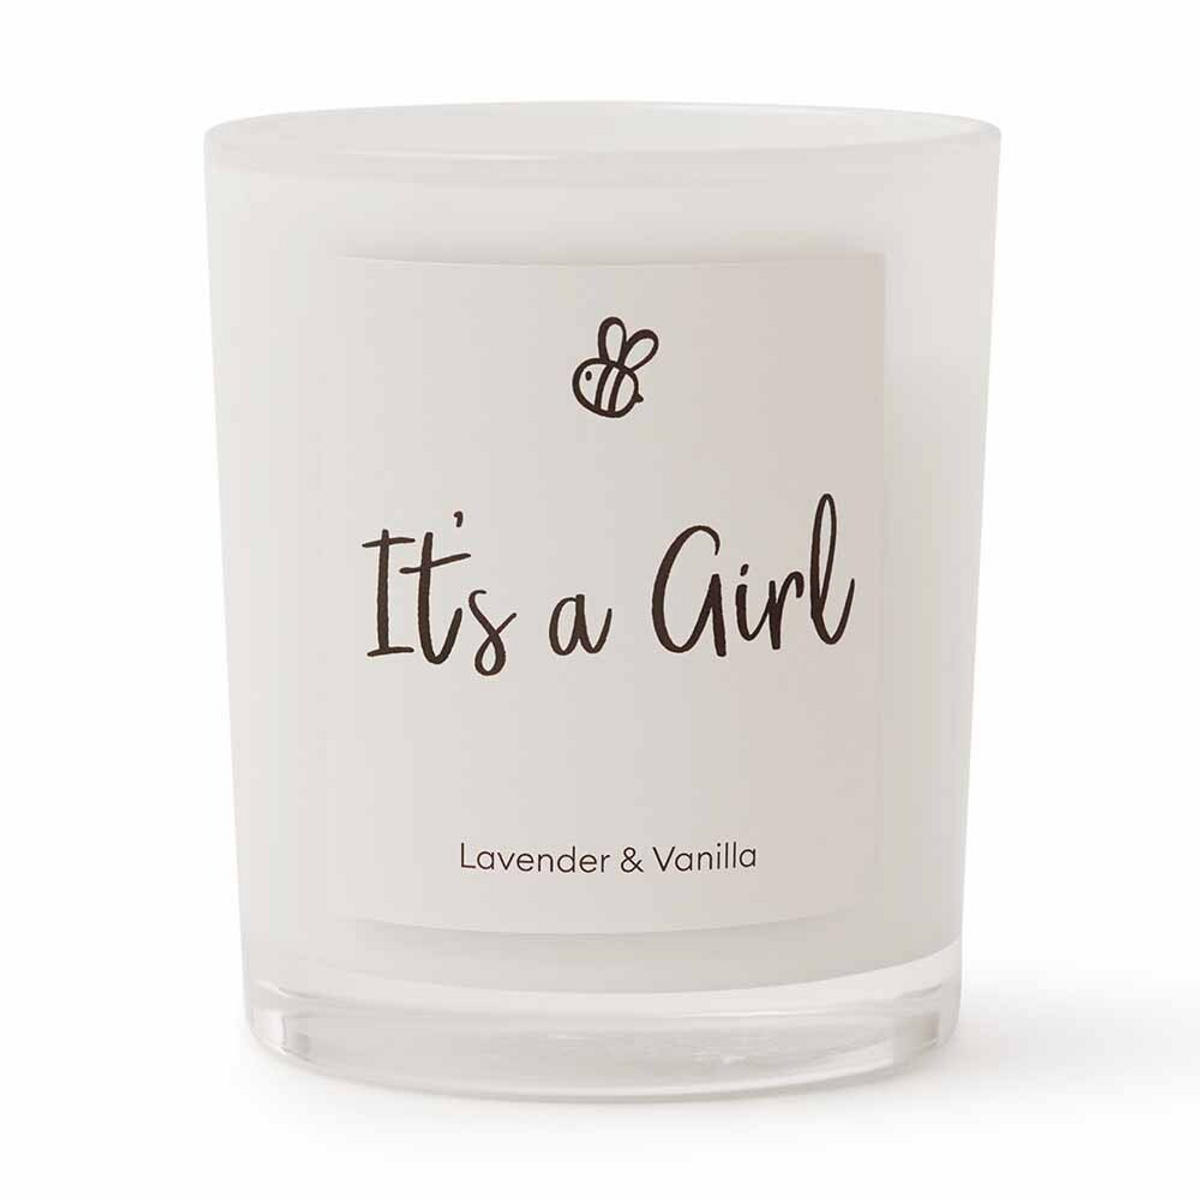 SNUGGLE HUNNY KIDS NATURAL SOY CANDLE LAVENDER & VANILLA - IT'S A GIRL